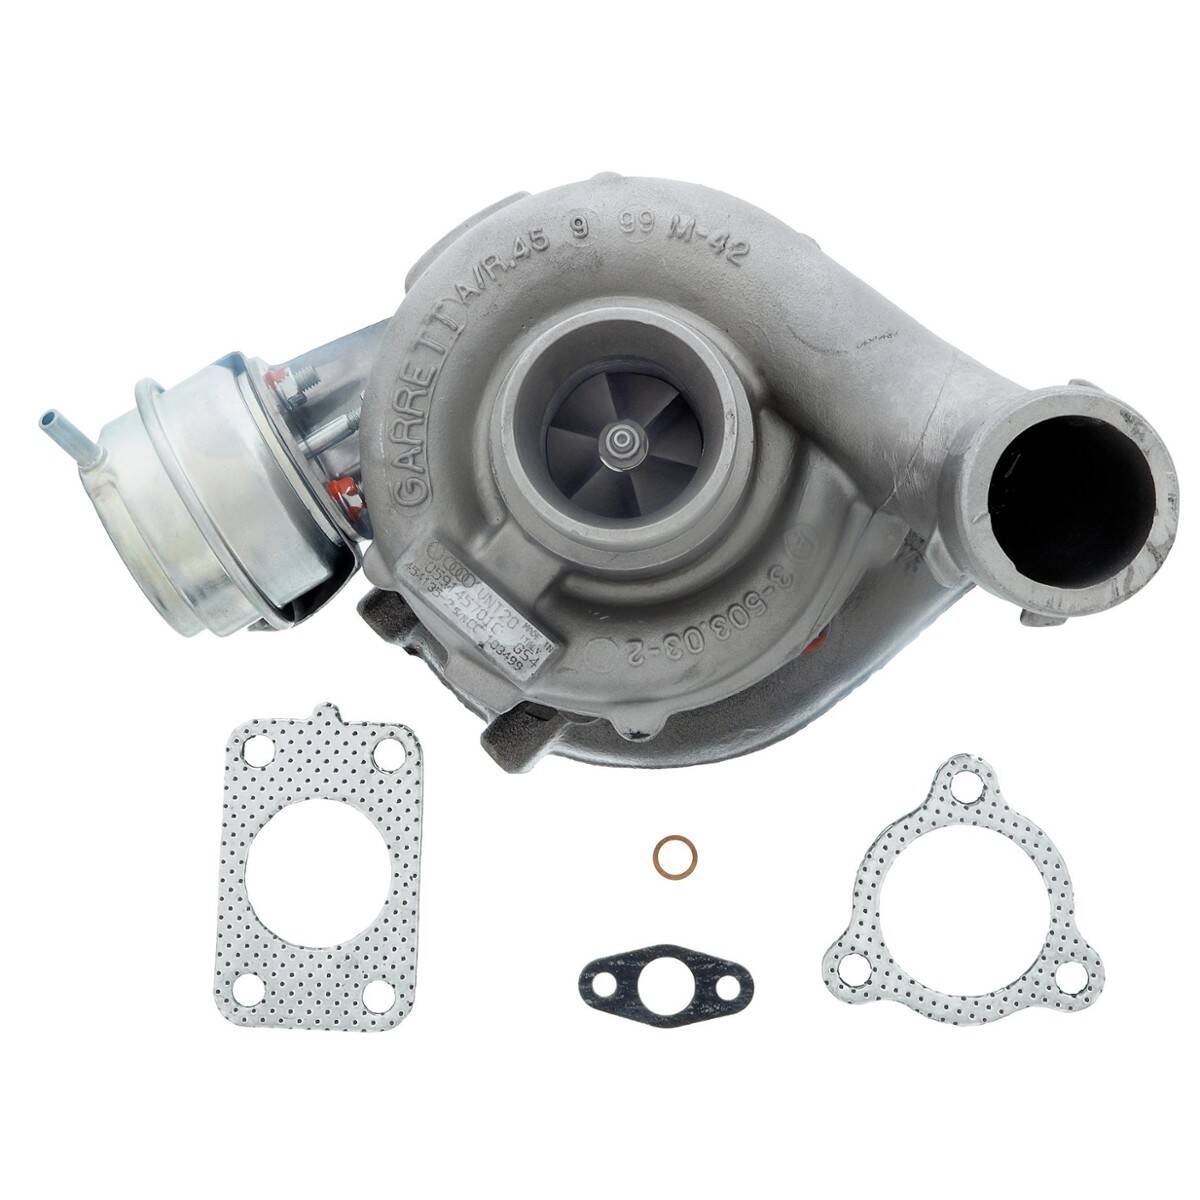 TURBOCHARGER TURBO REMANUFACTURED 454135-0011 454135-0011